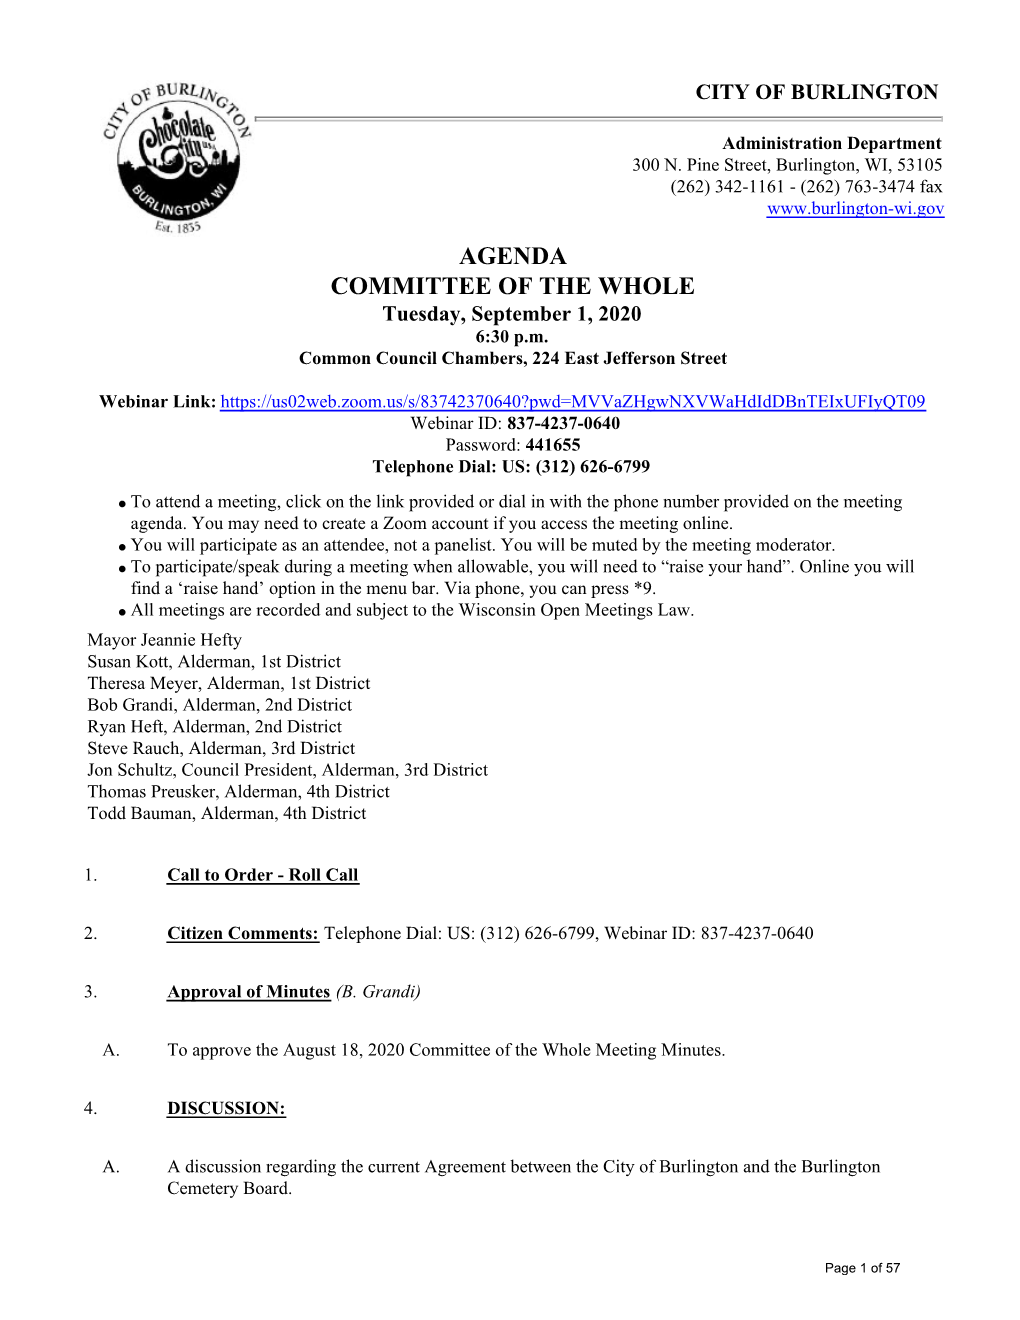 AGENDA COMMITTEE of the WHOLE Tuesday, September 1, 2020 6:30 P.M